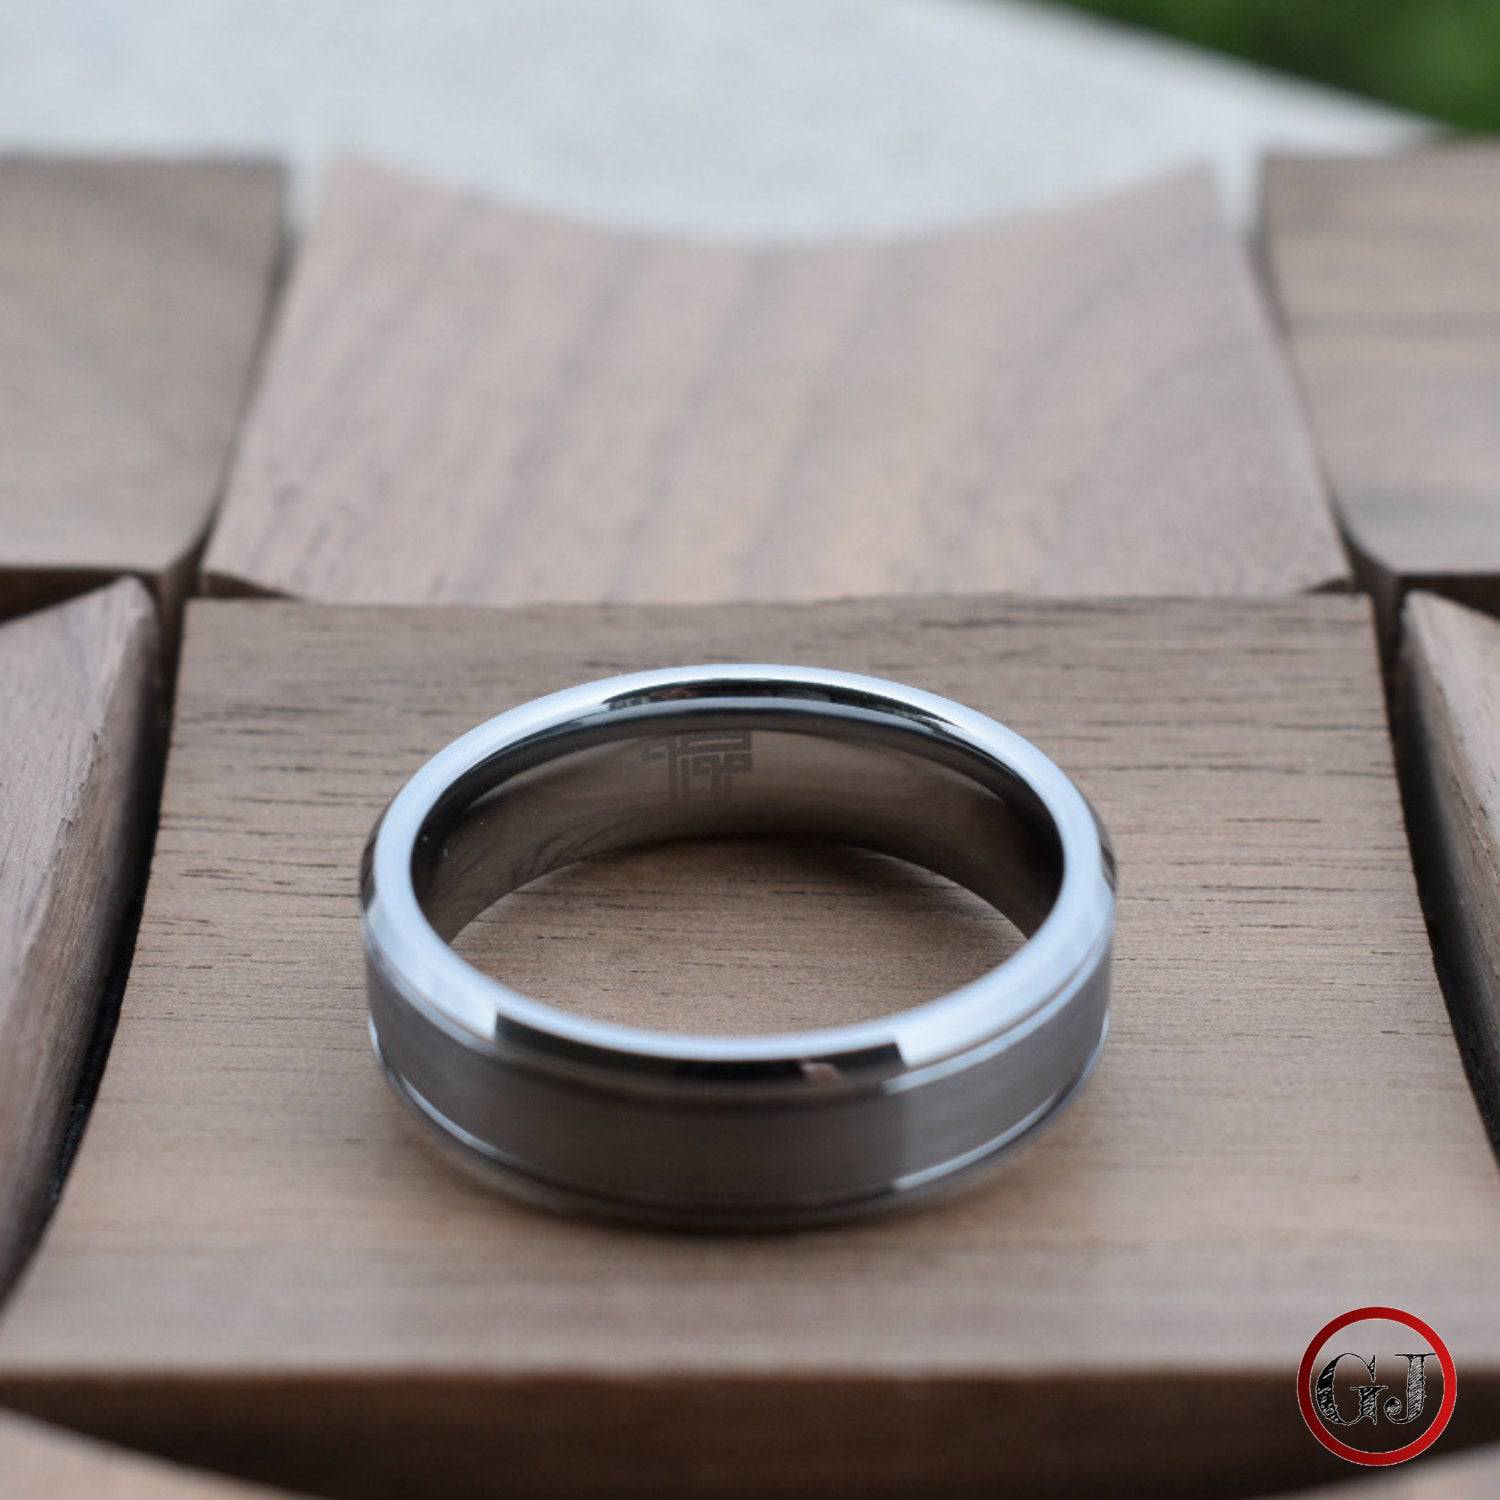 Silver Brushed Bevelled Edge 7mm Tungsten Ring - Tungsten Titans